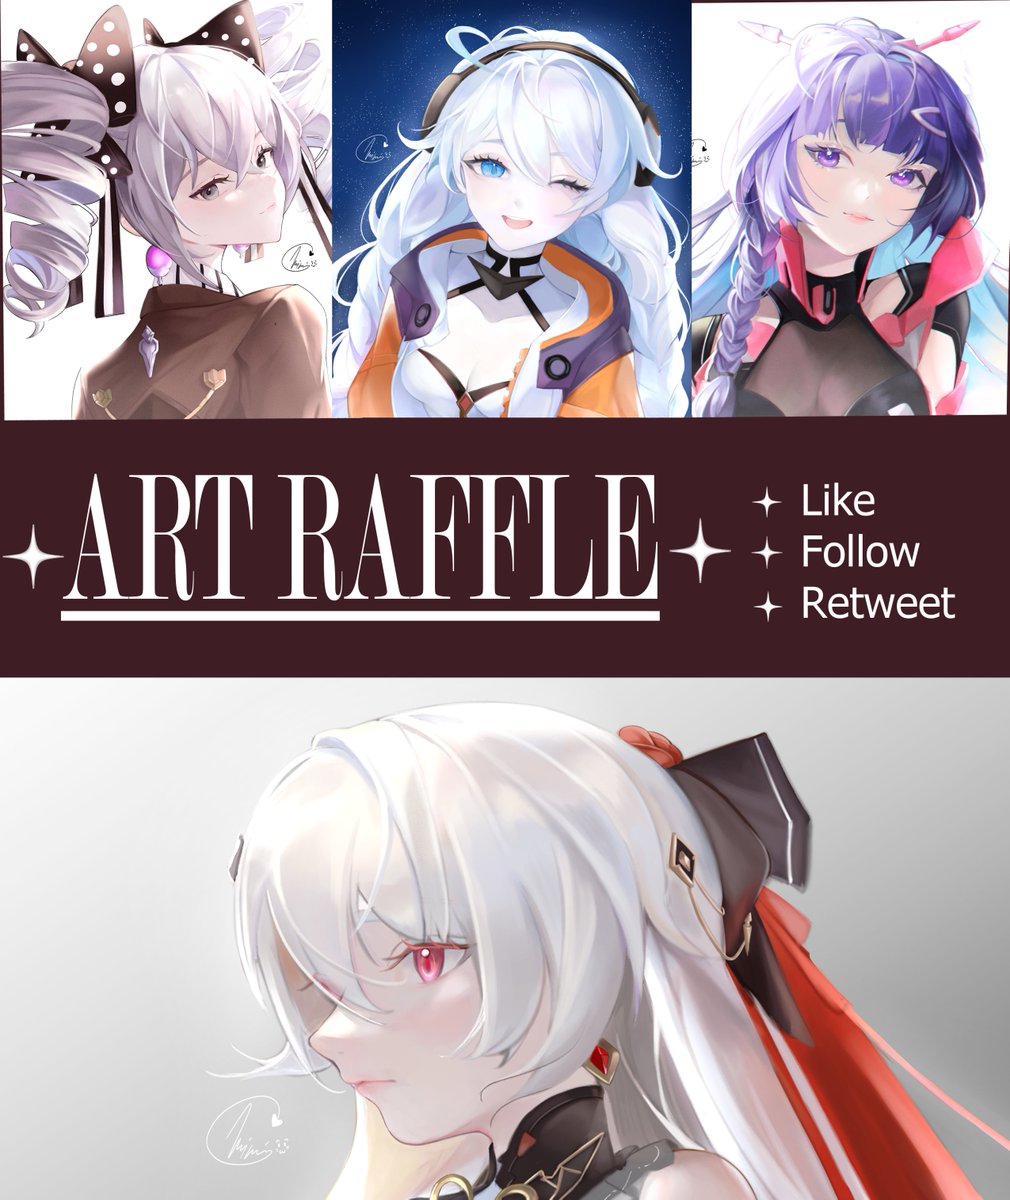 400+ FOLLOWERS ✨⋆ART RAFFLE⋆✨

✨ RULES~ 

°Like°°Follow°°Retweet°

✨4 WINNERS PRIZE 🏆🏵️✨

-3 BUST UPS🌸
-1 KNEE/FULL BODY 🌸

Thank you so much everyone who's been supporting me in every way! ♥

✨ Ends on May 12th ✨

✨Good Luck~ ✨

#artraffle